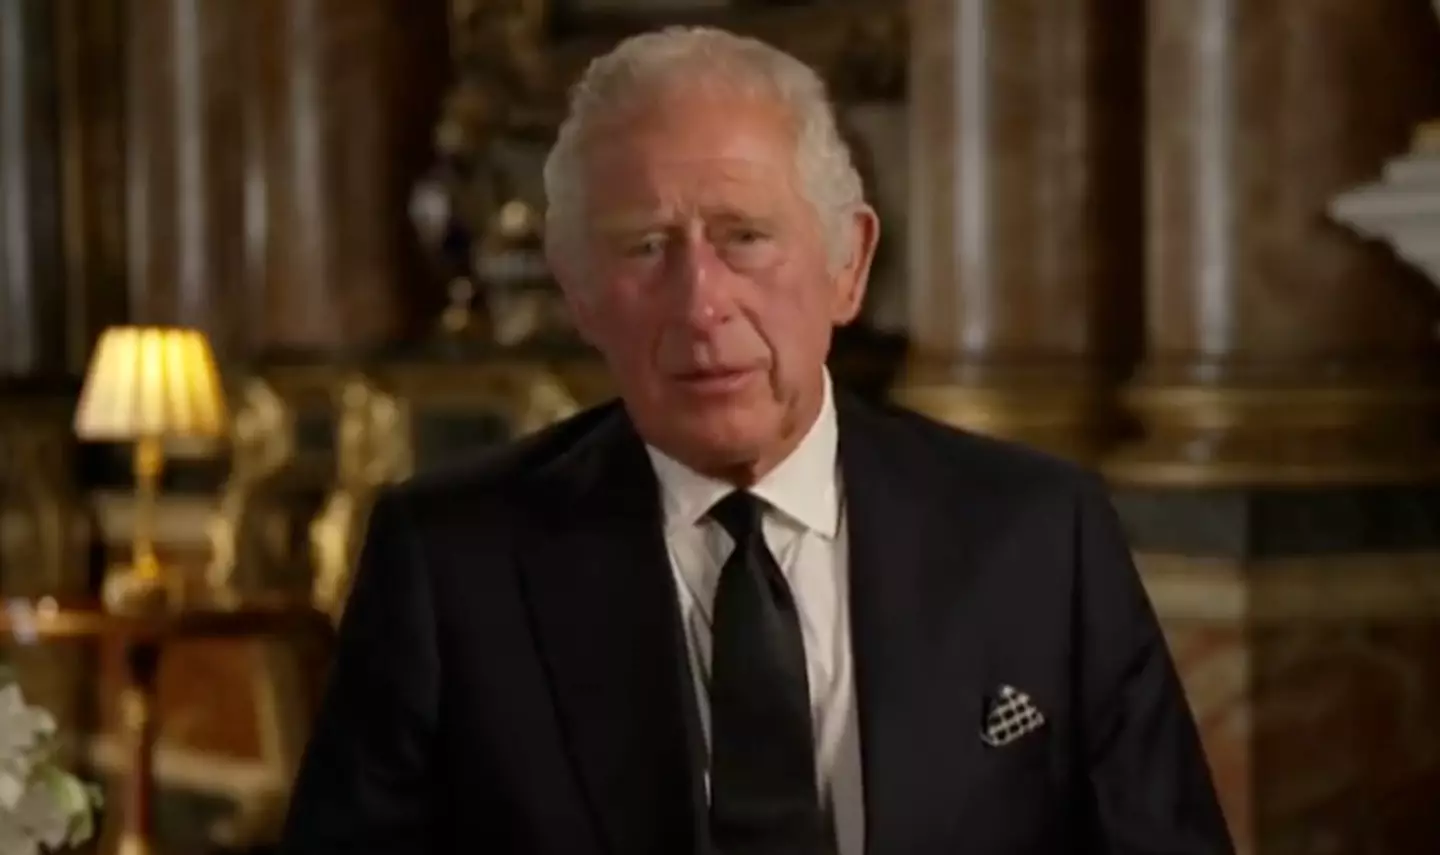 King Charles III paid tribute to his mother in his speech.